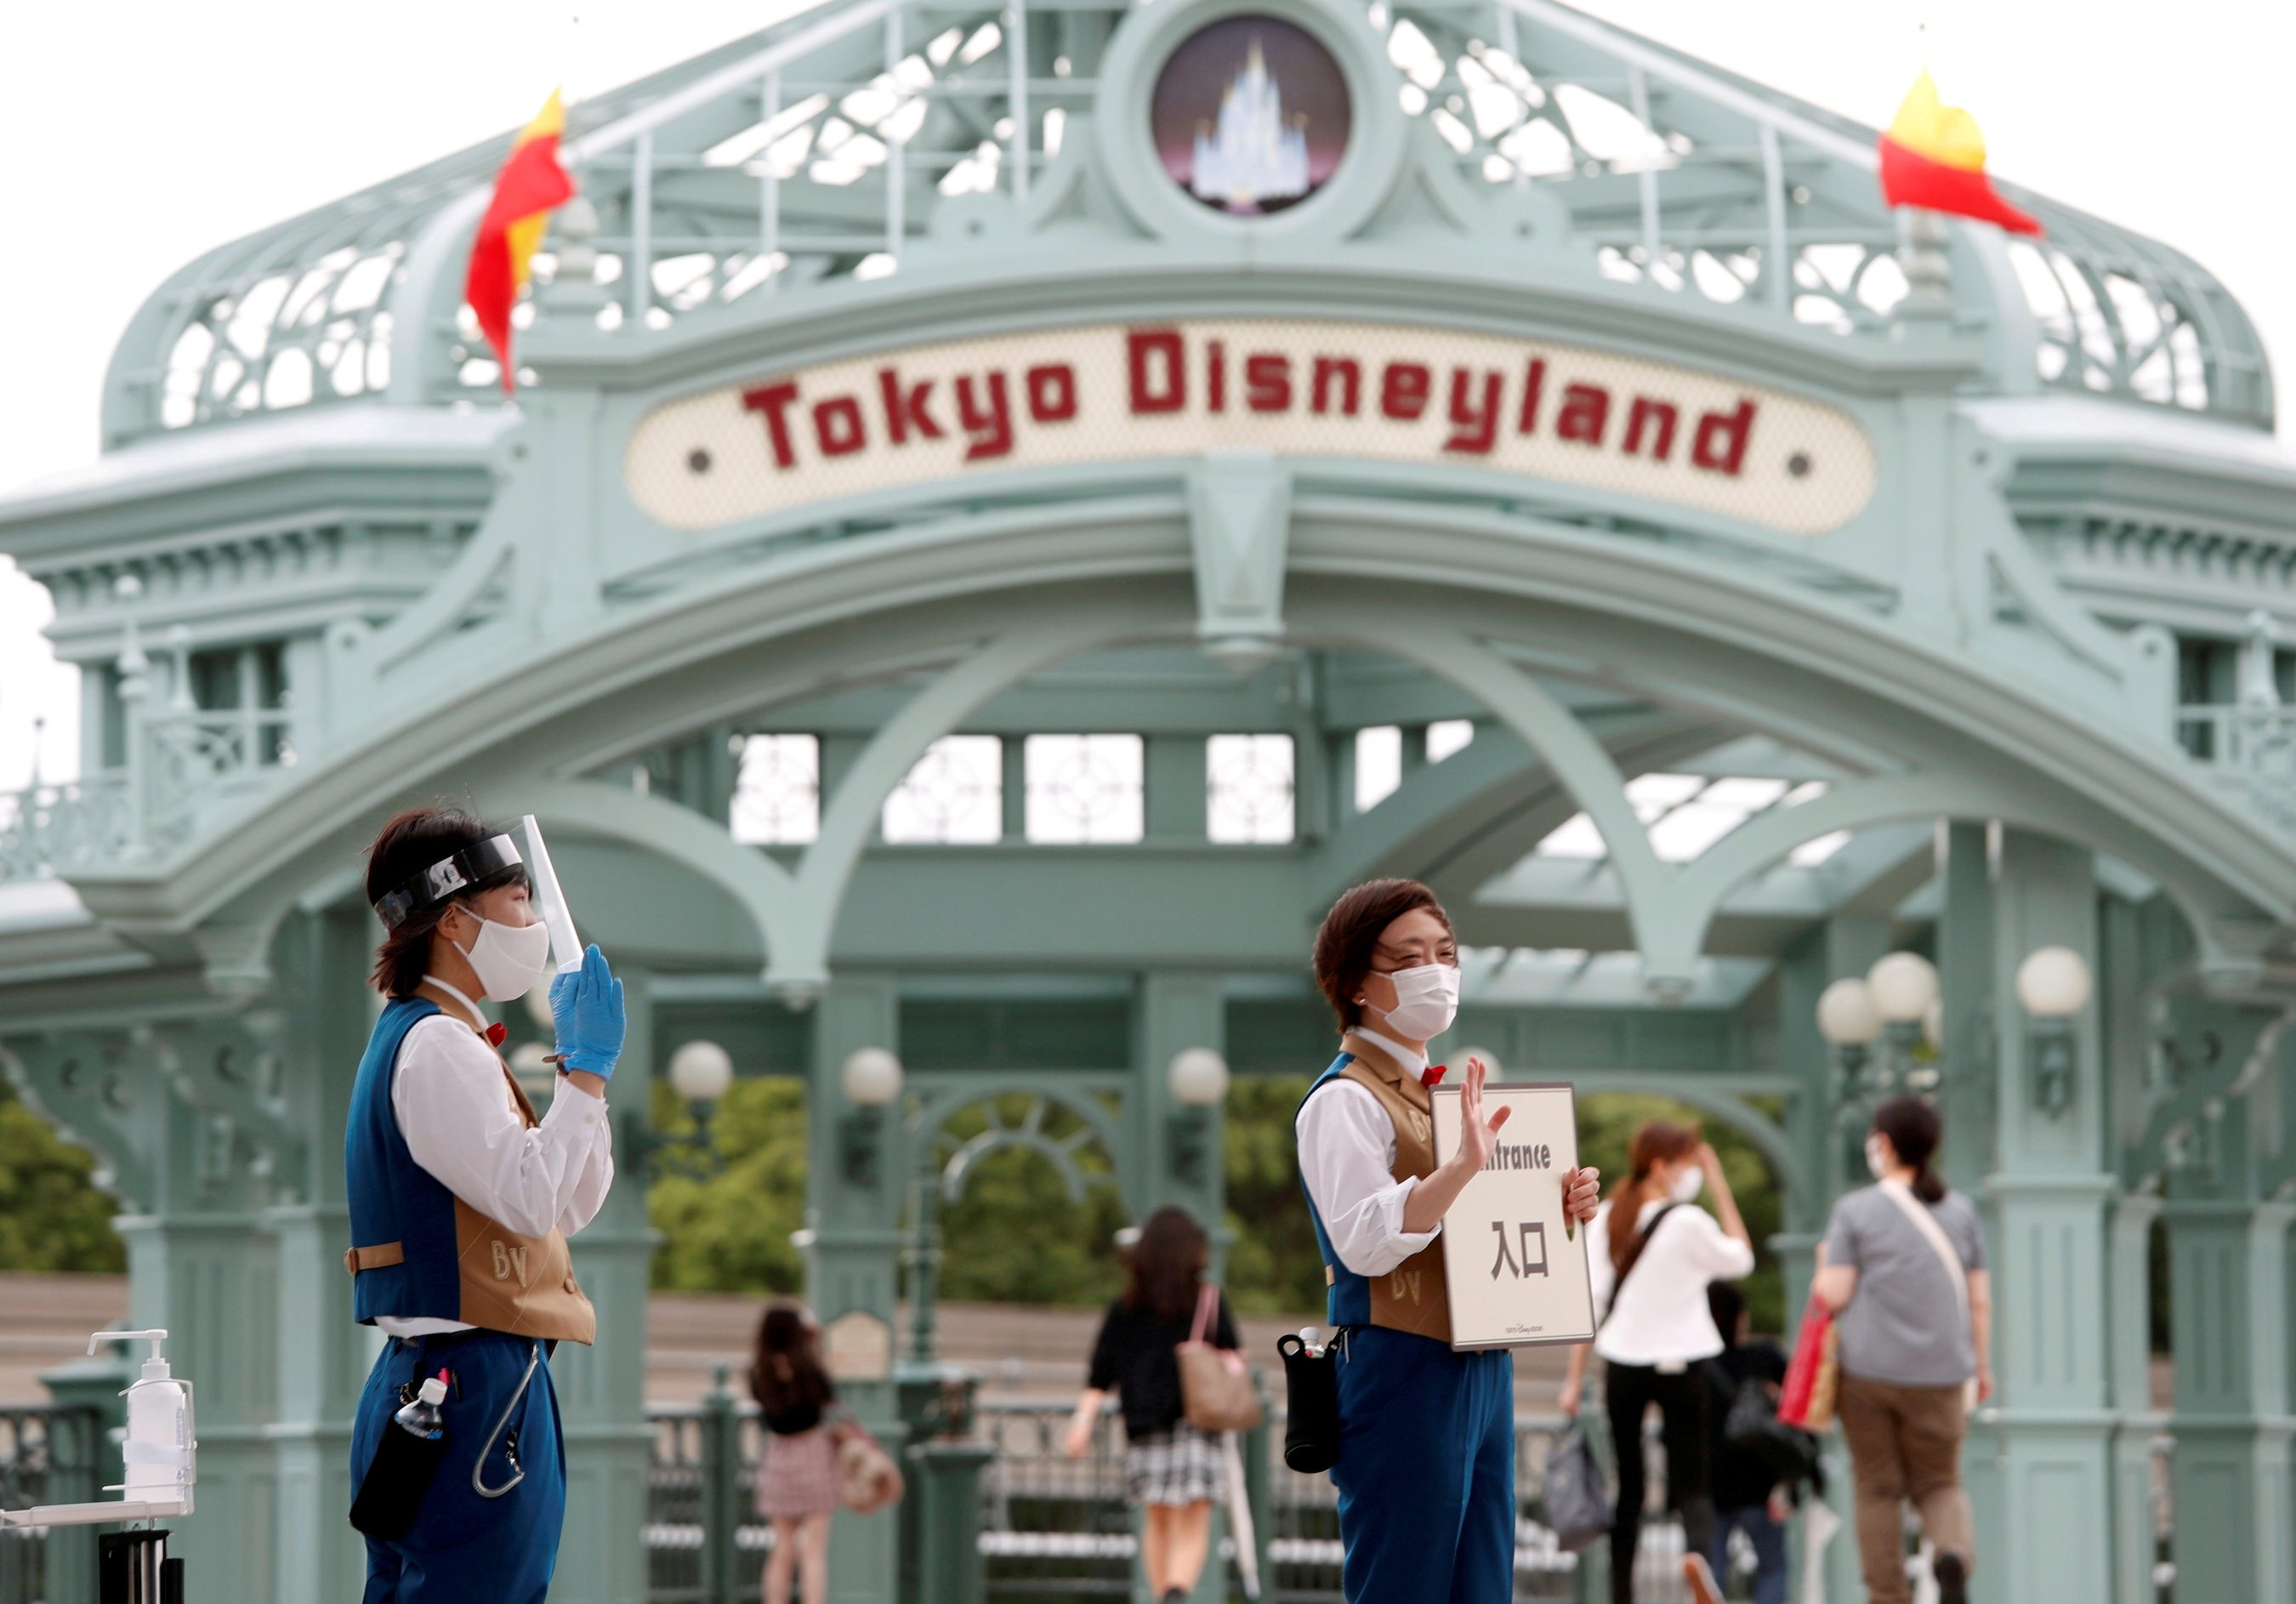 Disney returns to profit as streaming success offsets pandemic-hit parks